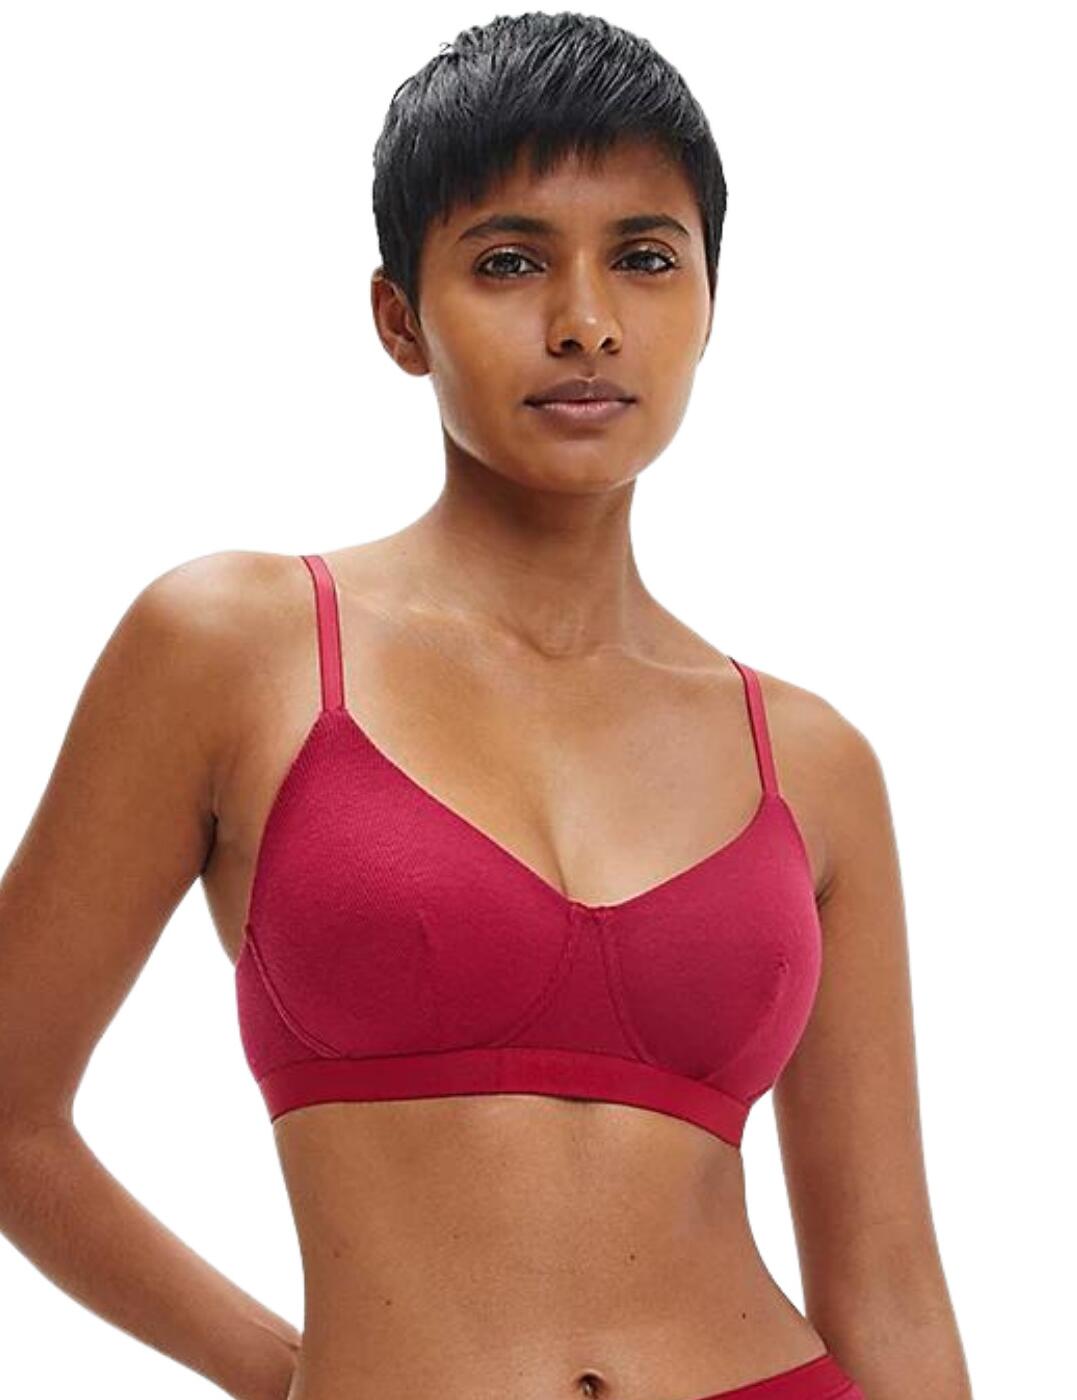 Calvin Klein Pure Ribbed Lightly Lined Bralette Rebellious